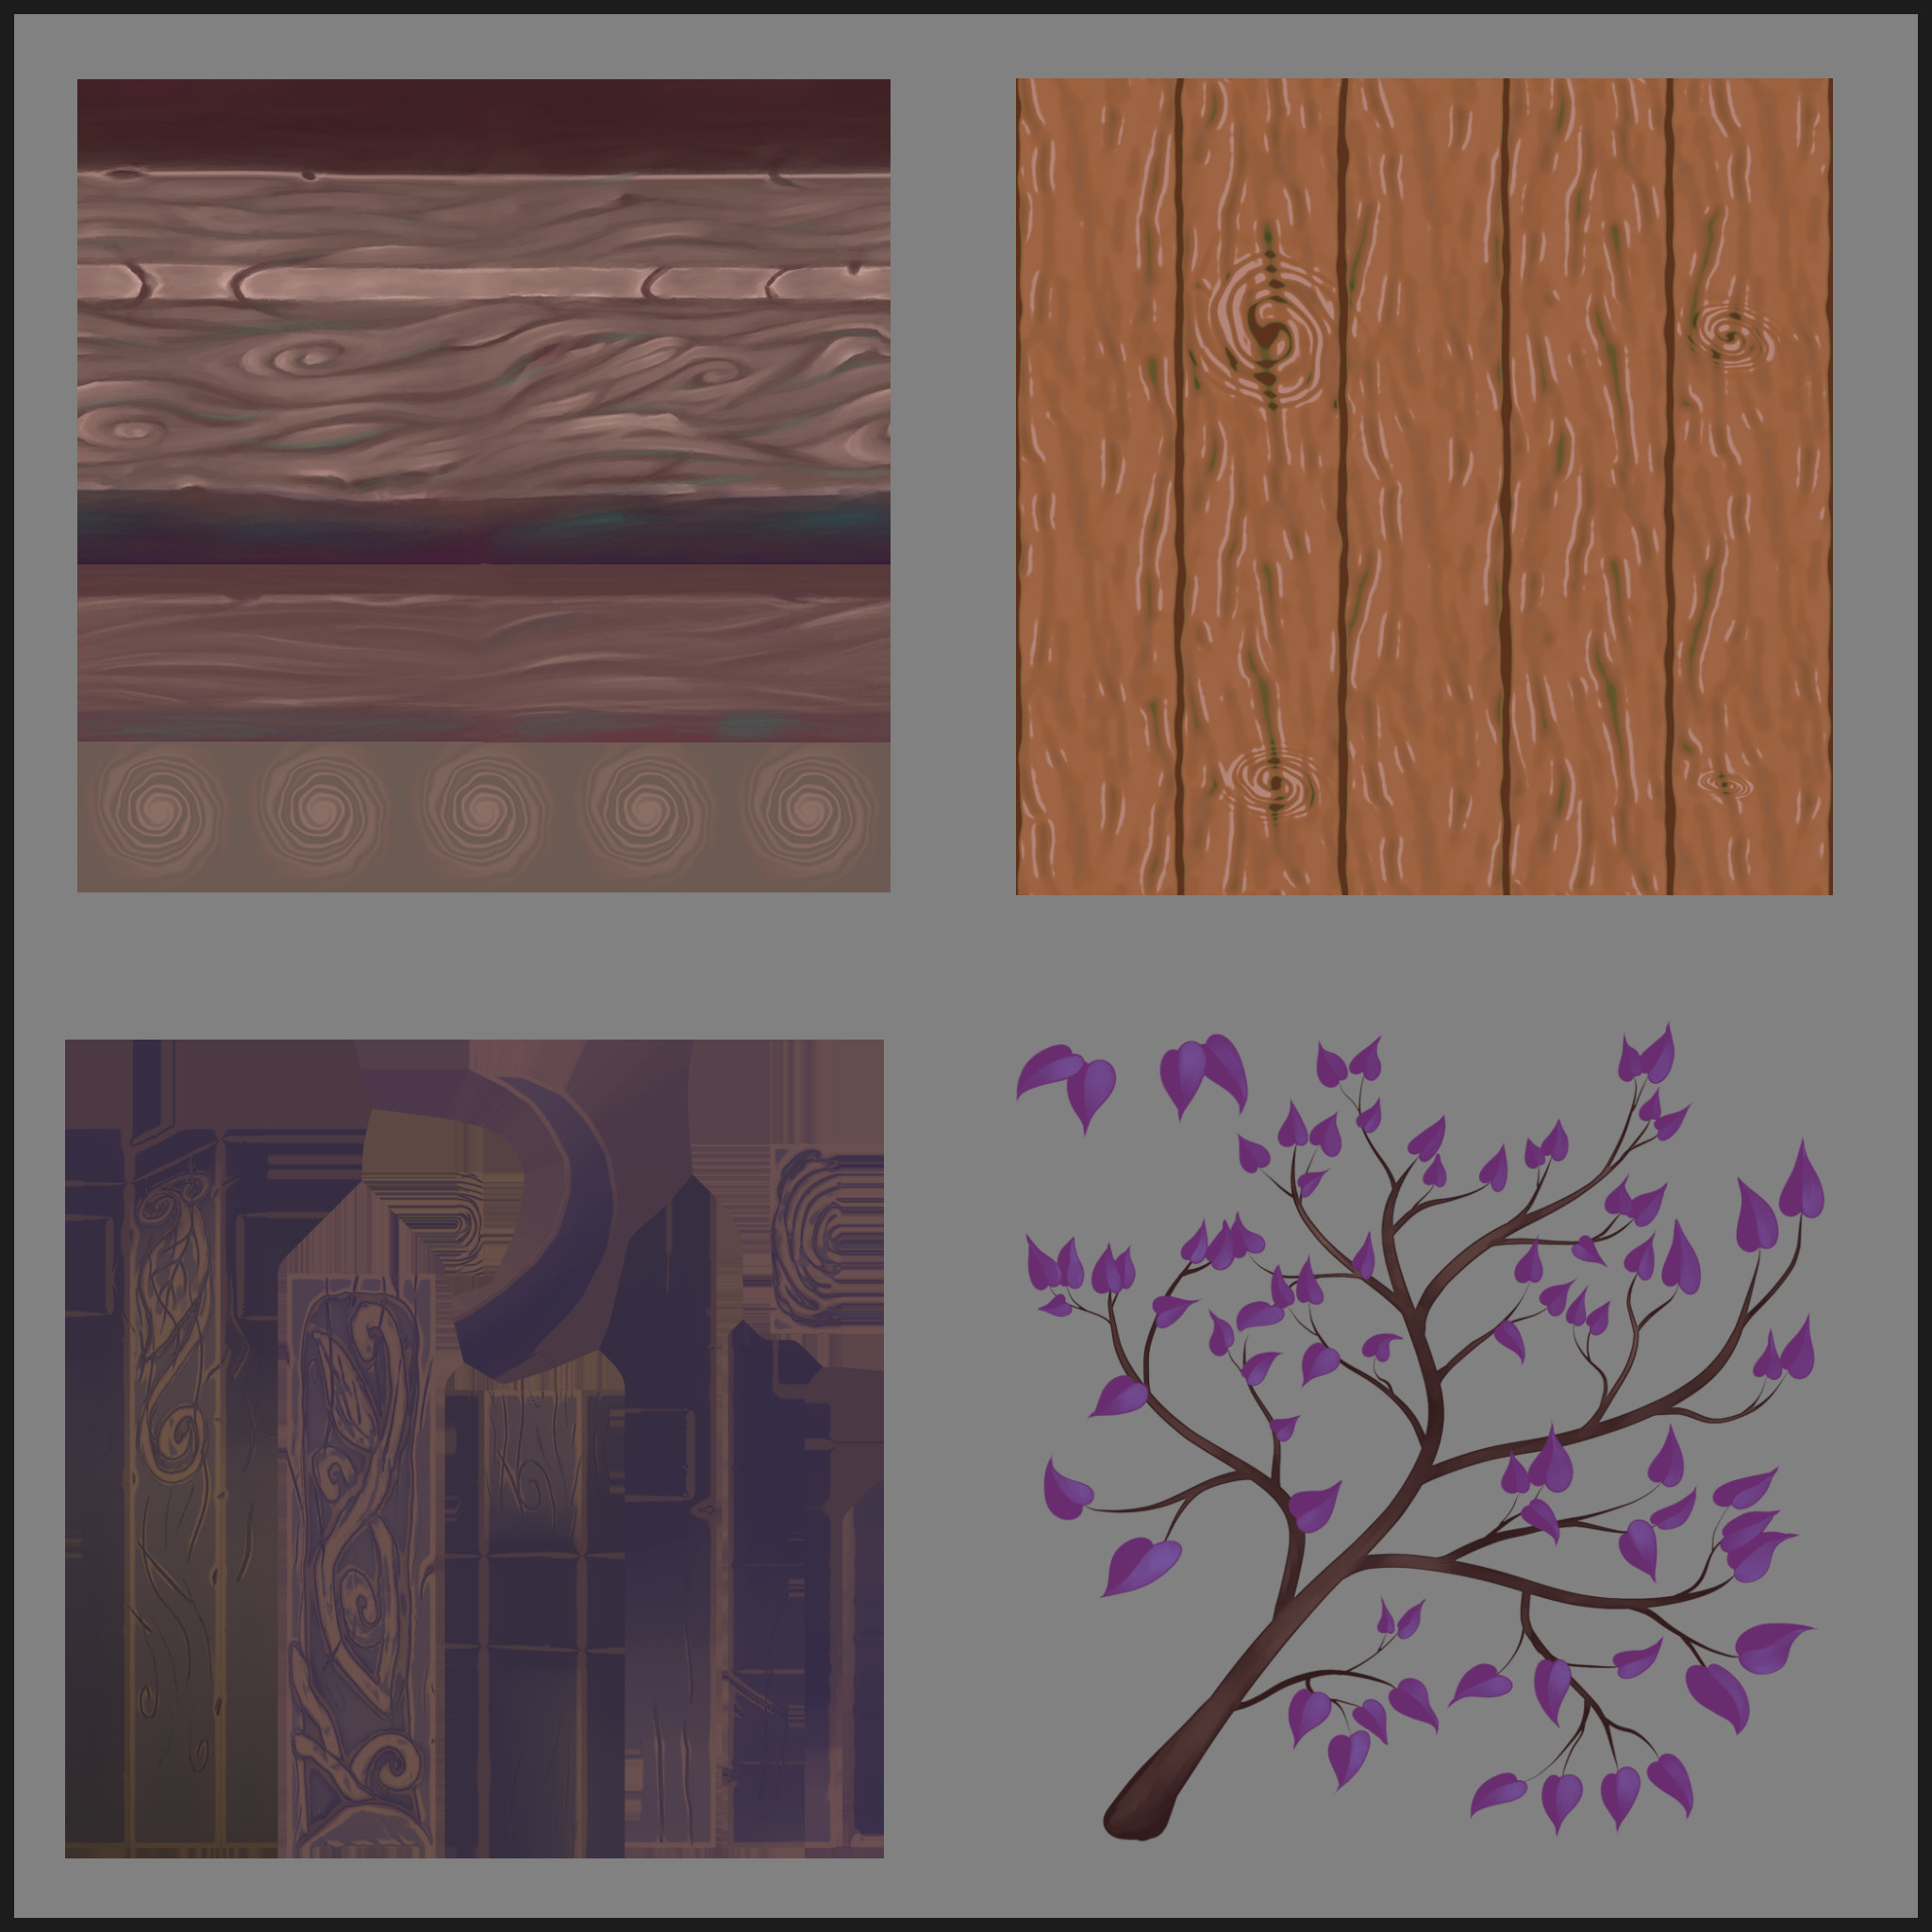 Some textures showing both hand painted and procedural work